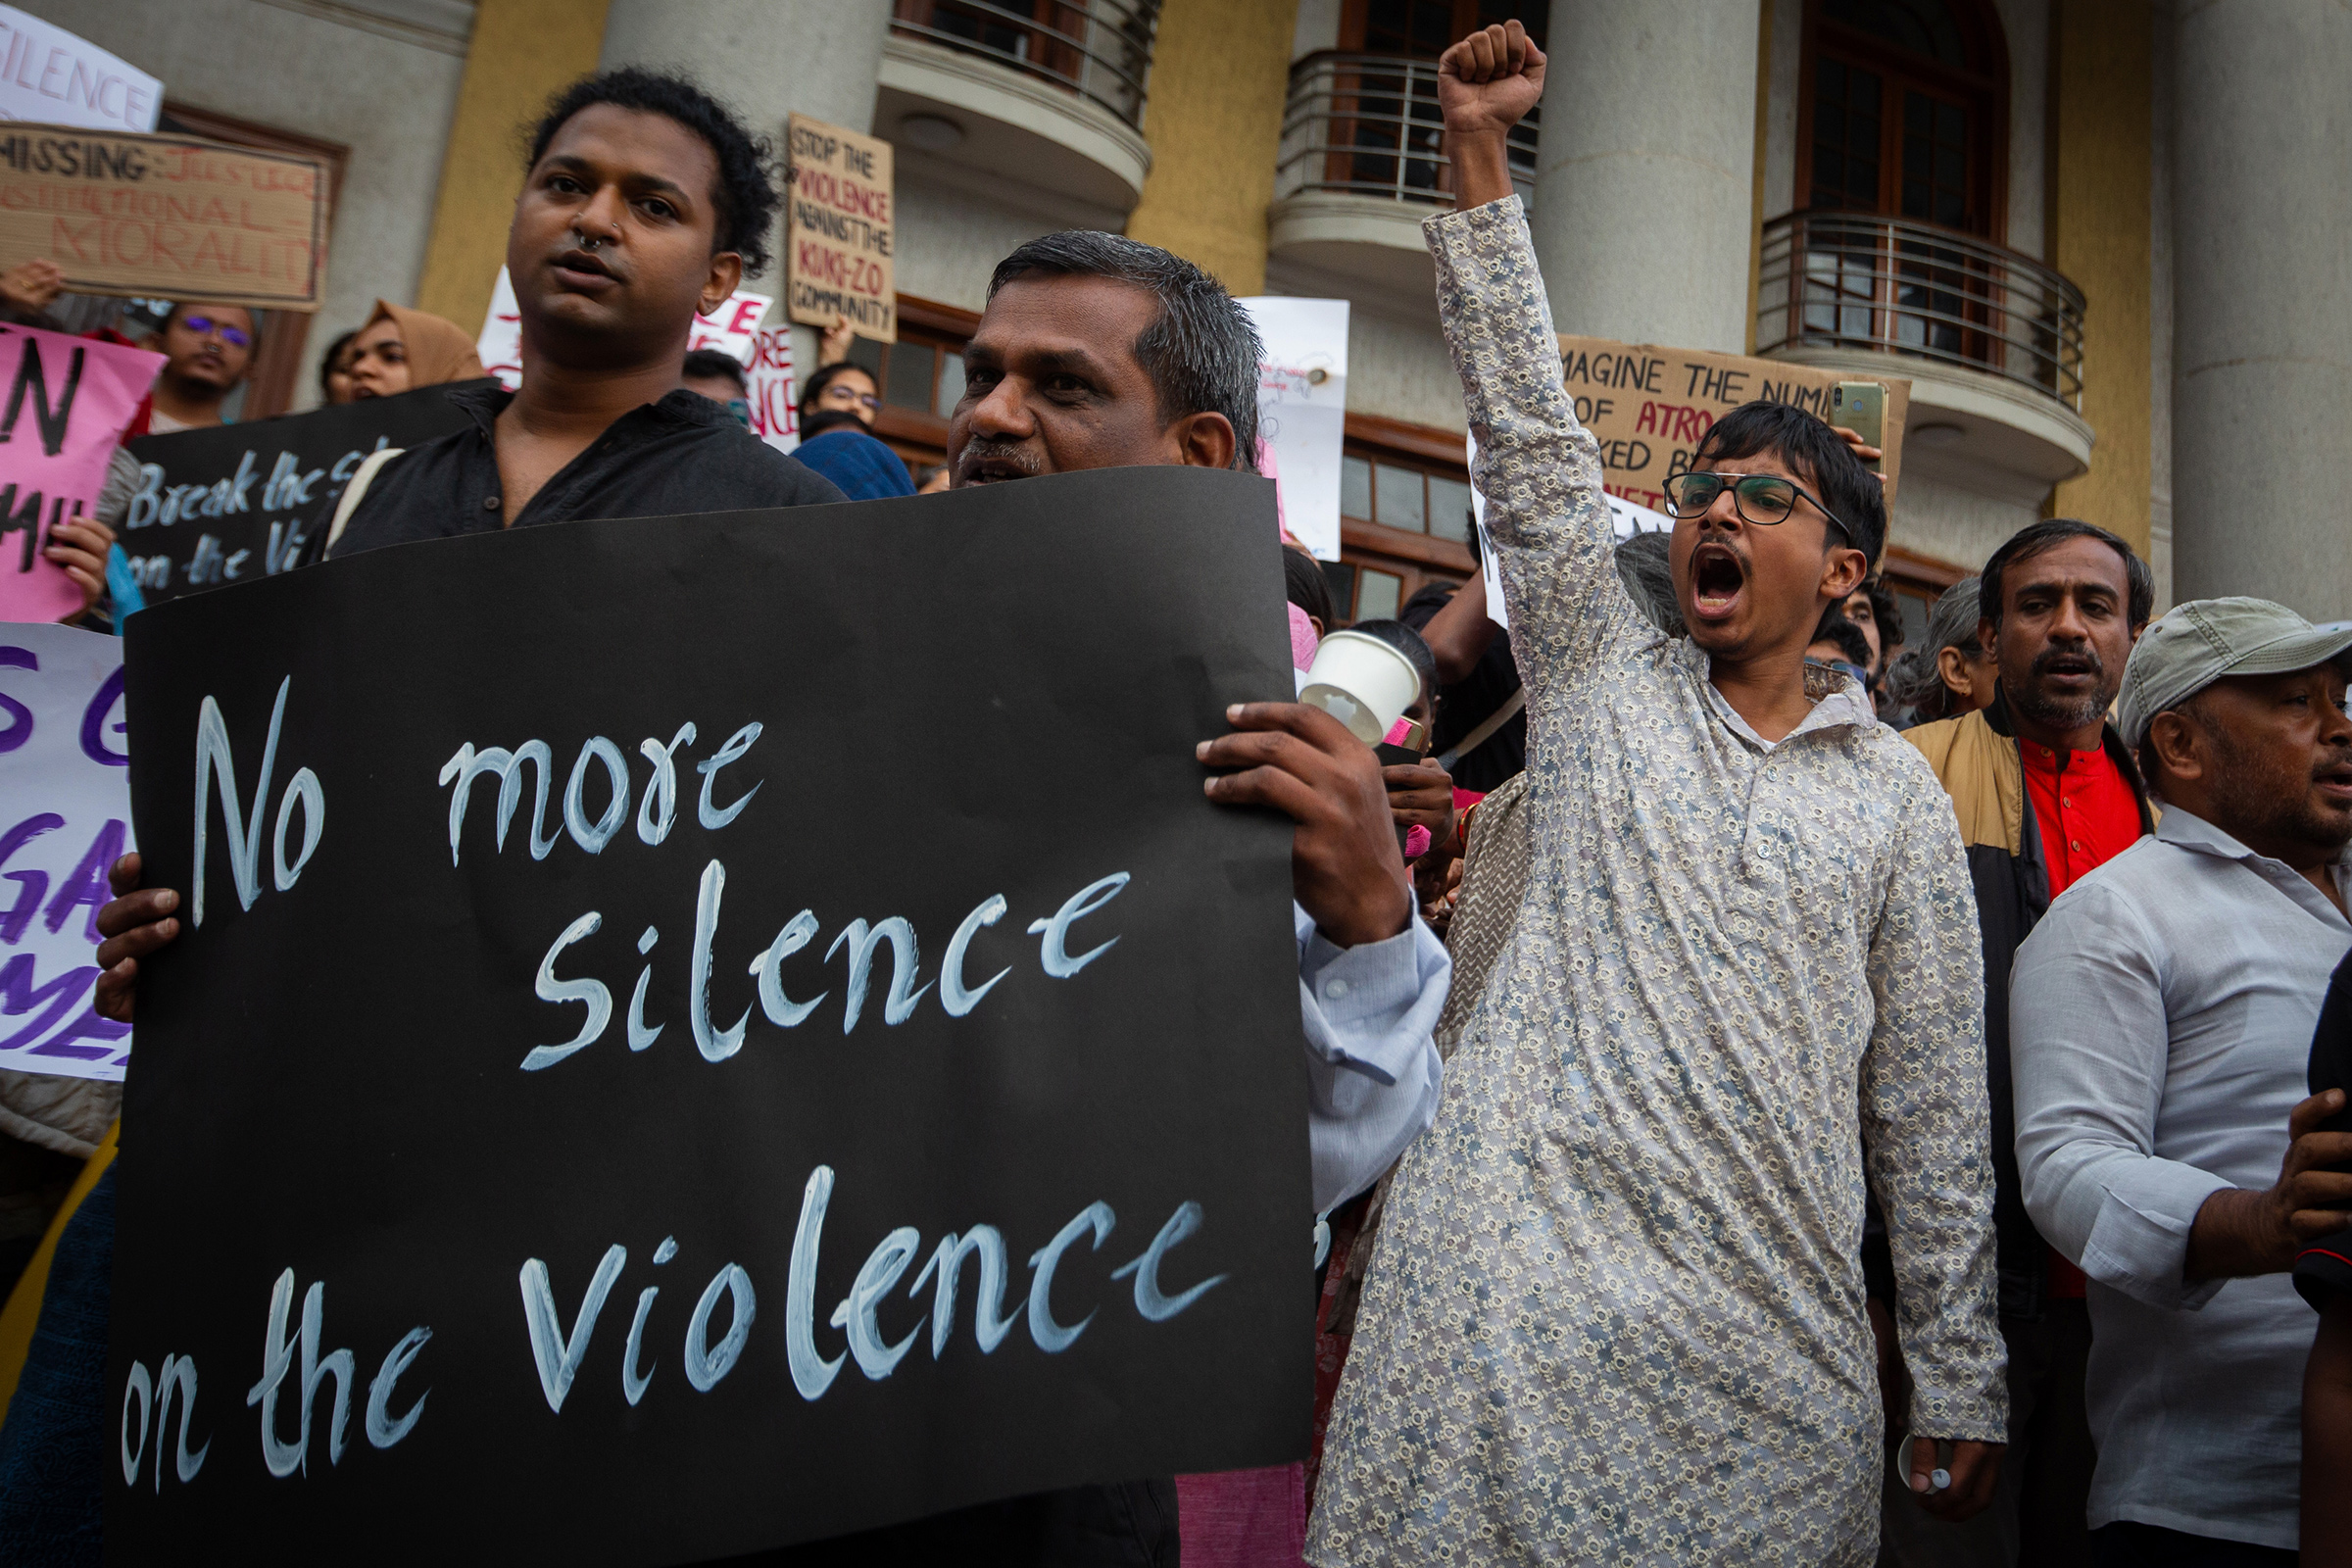 People shout slogans and hold up placards during a protest against violence in the northeastern Indian state of Manipur on July 21 in Bengaluru, India.  (Abhishek Chinnappa—Getty Images)